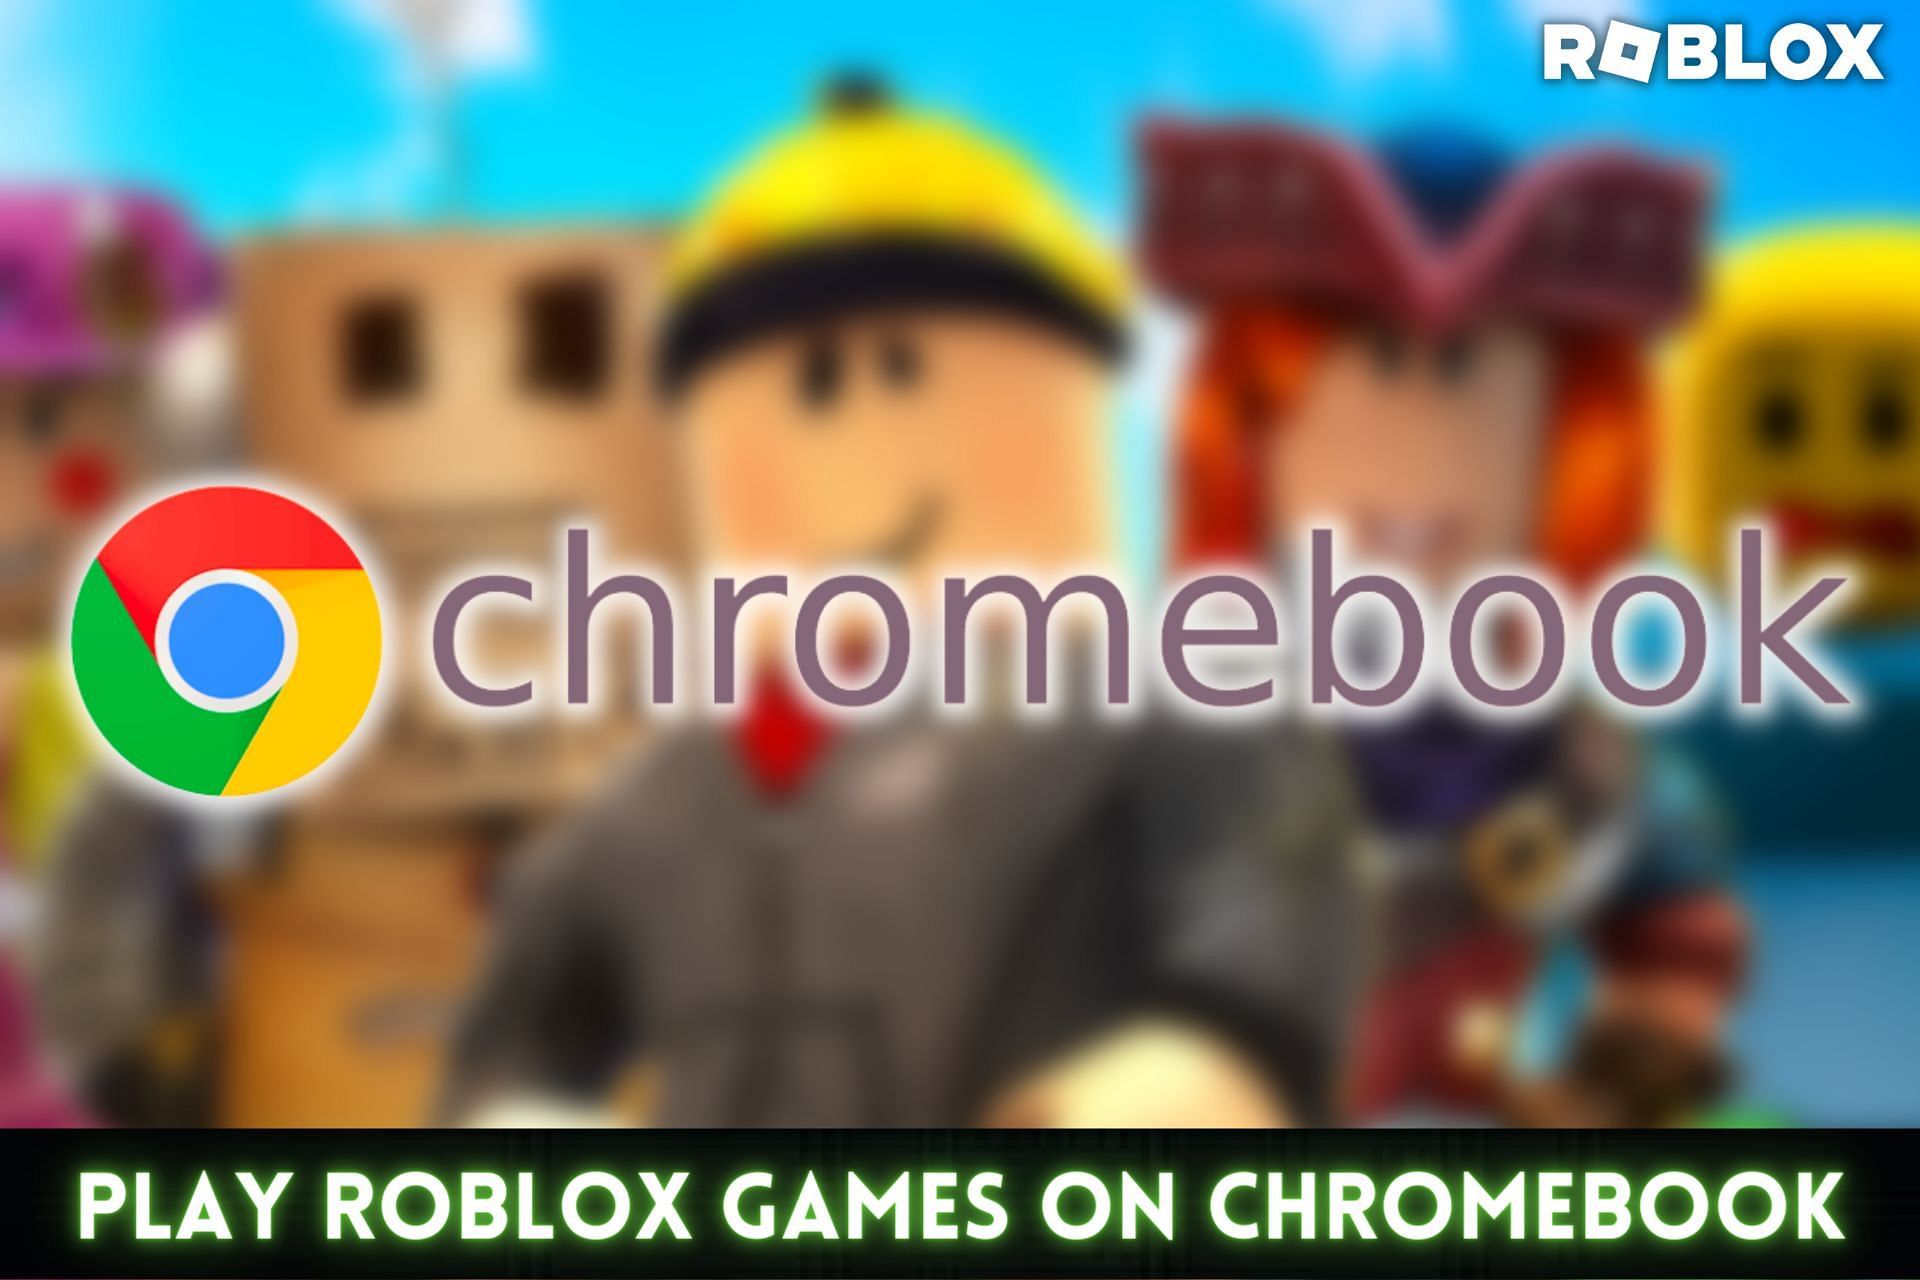 Play Roblox games on Chromebook